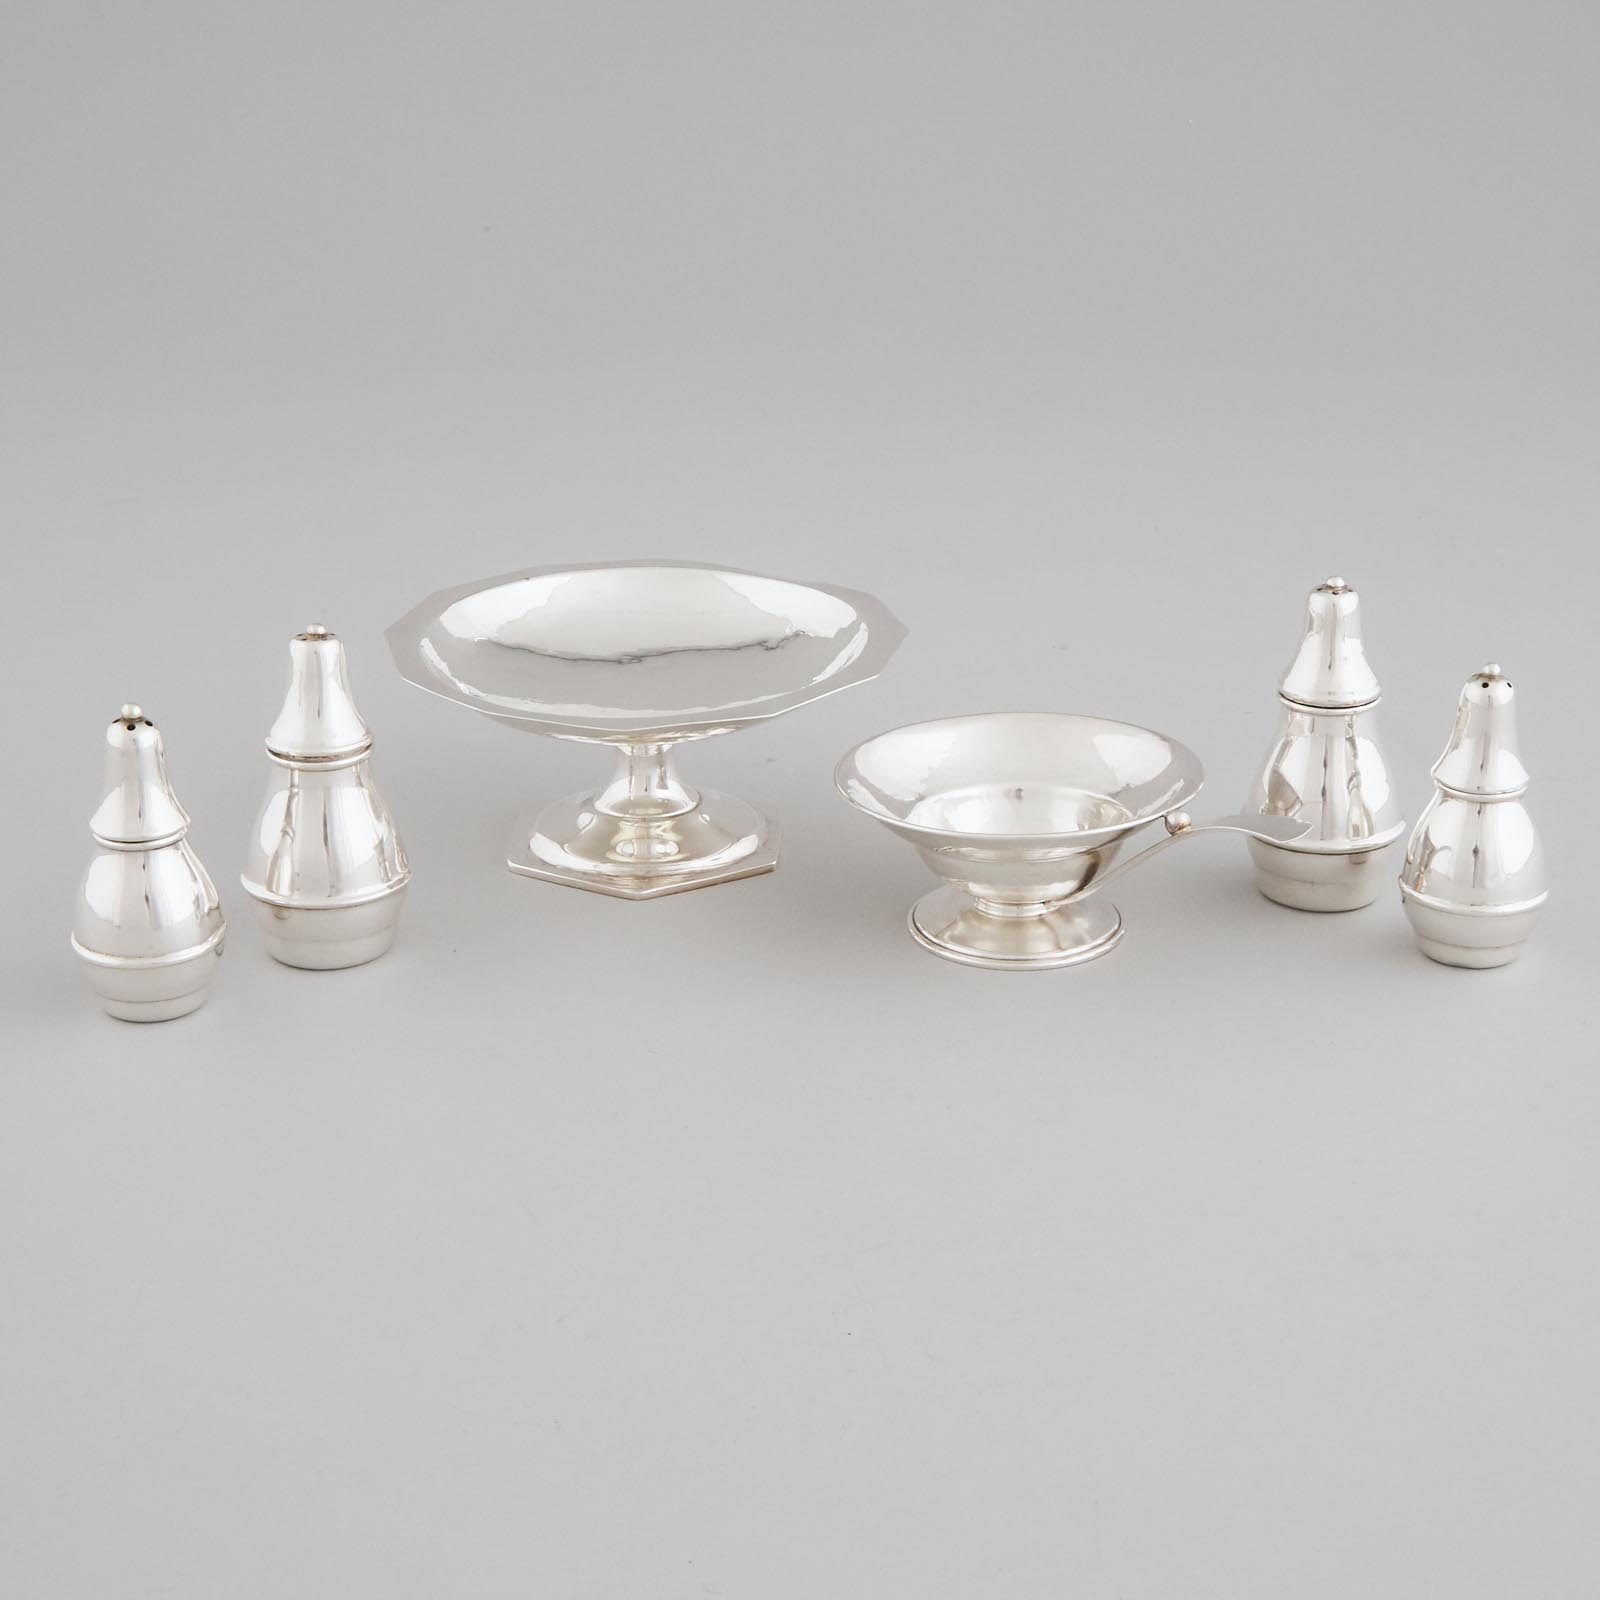 Canadian Silver Small Footed Comport, Two Pairs of Salt and Pepper Casters and a Single-Handled Dish, Poul Petersen, Montreal, Que., mid-20th century